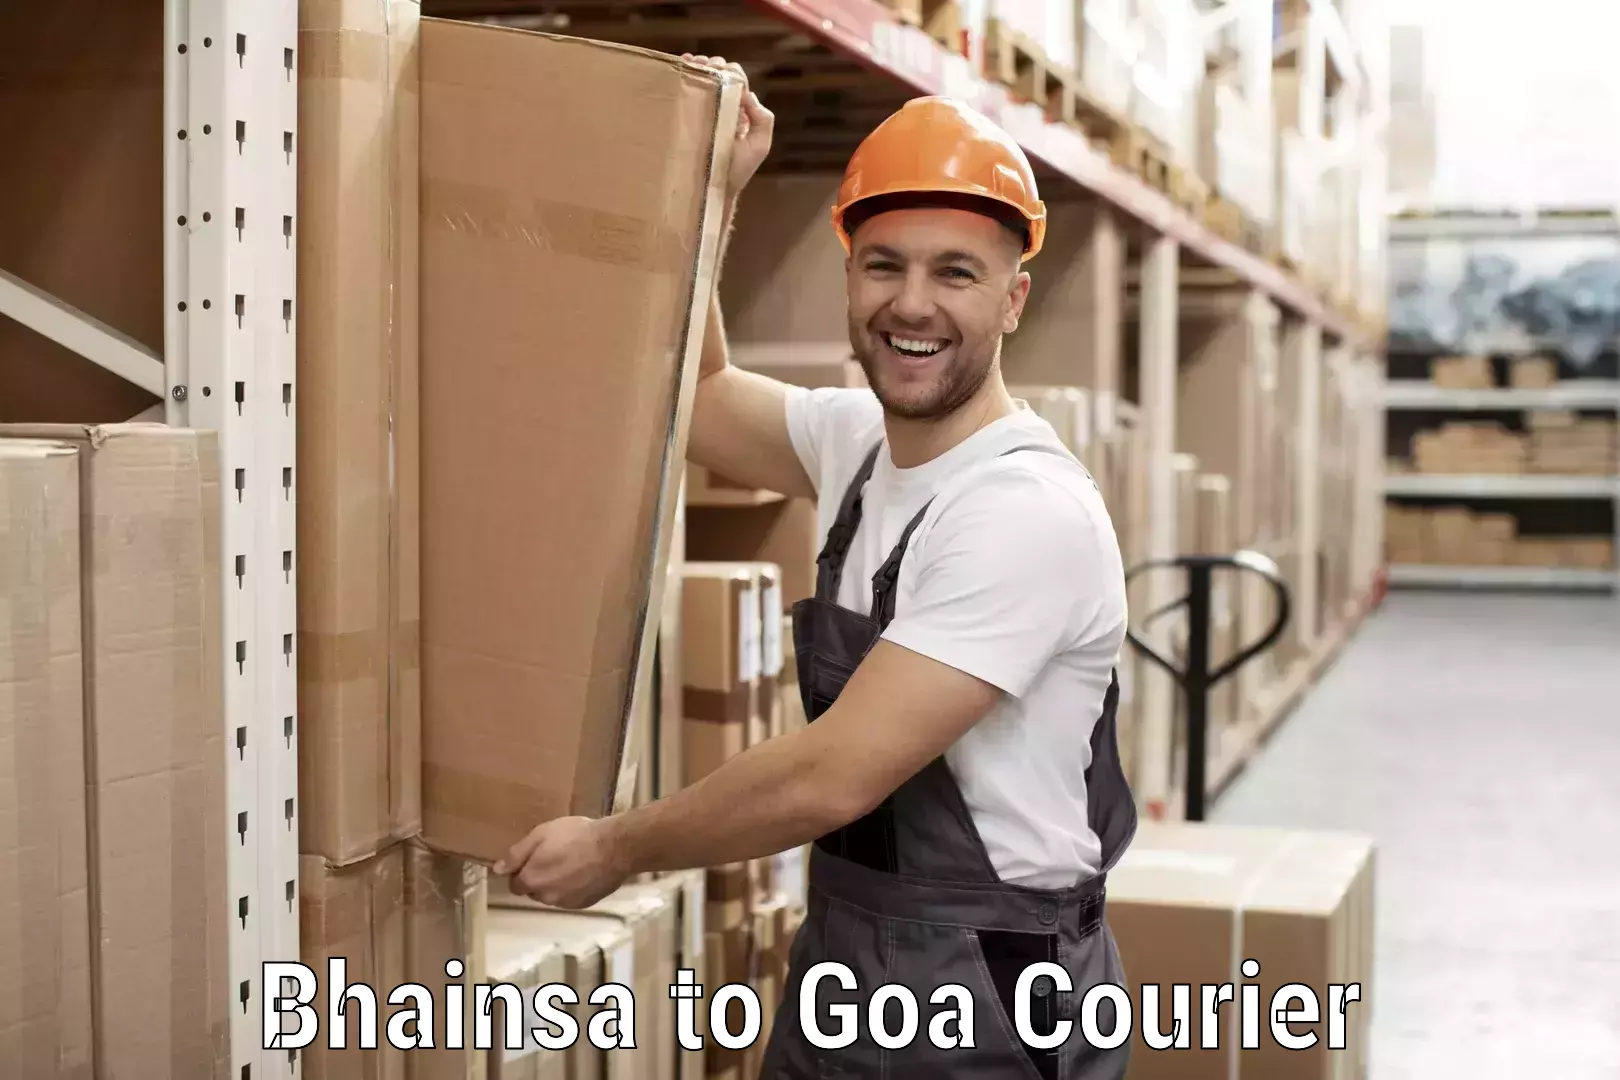 Nationwide delivery network Bhainsa to Goa